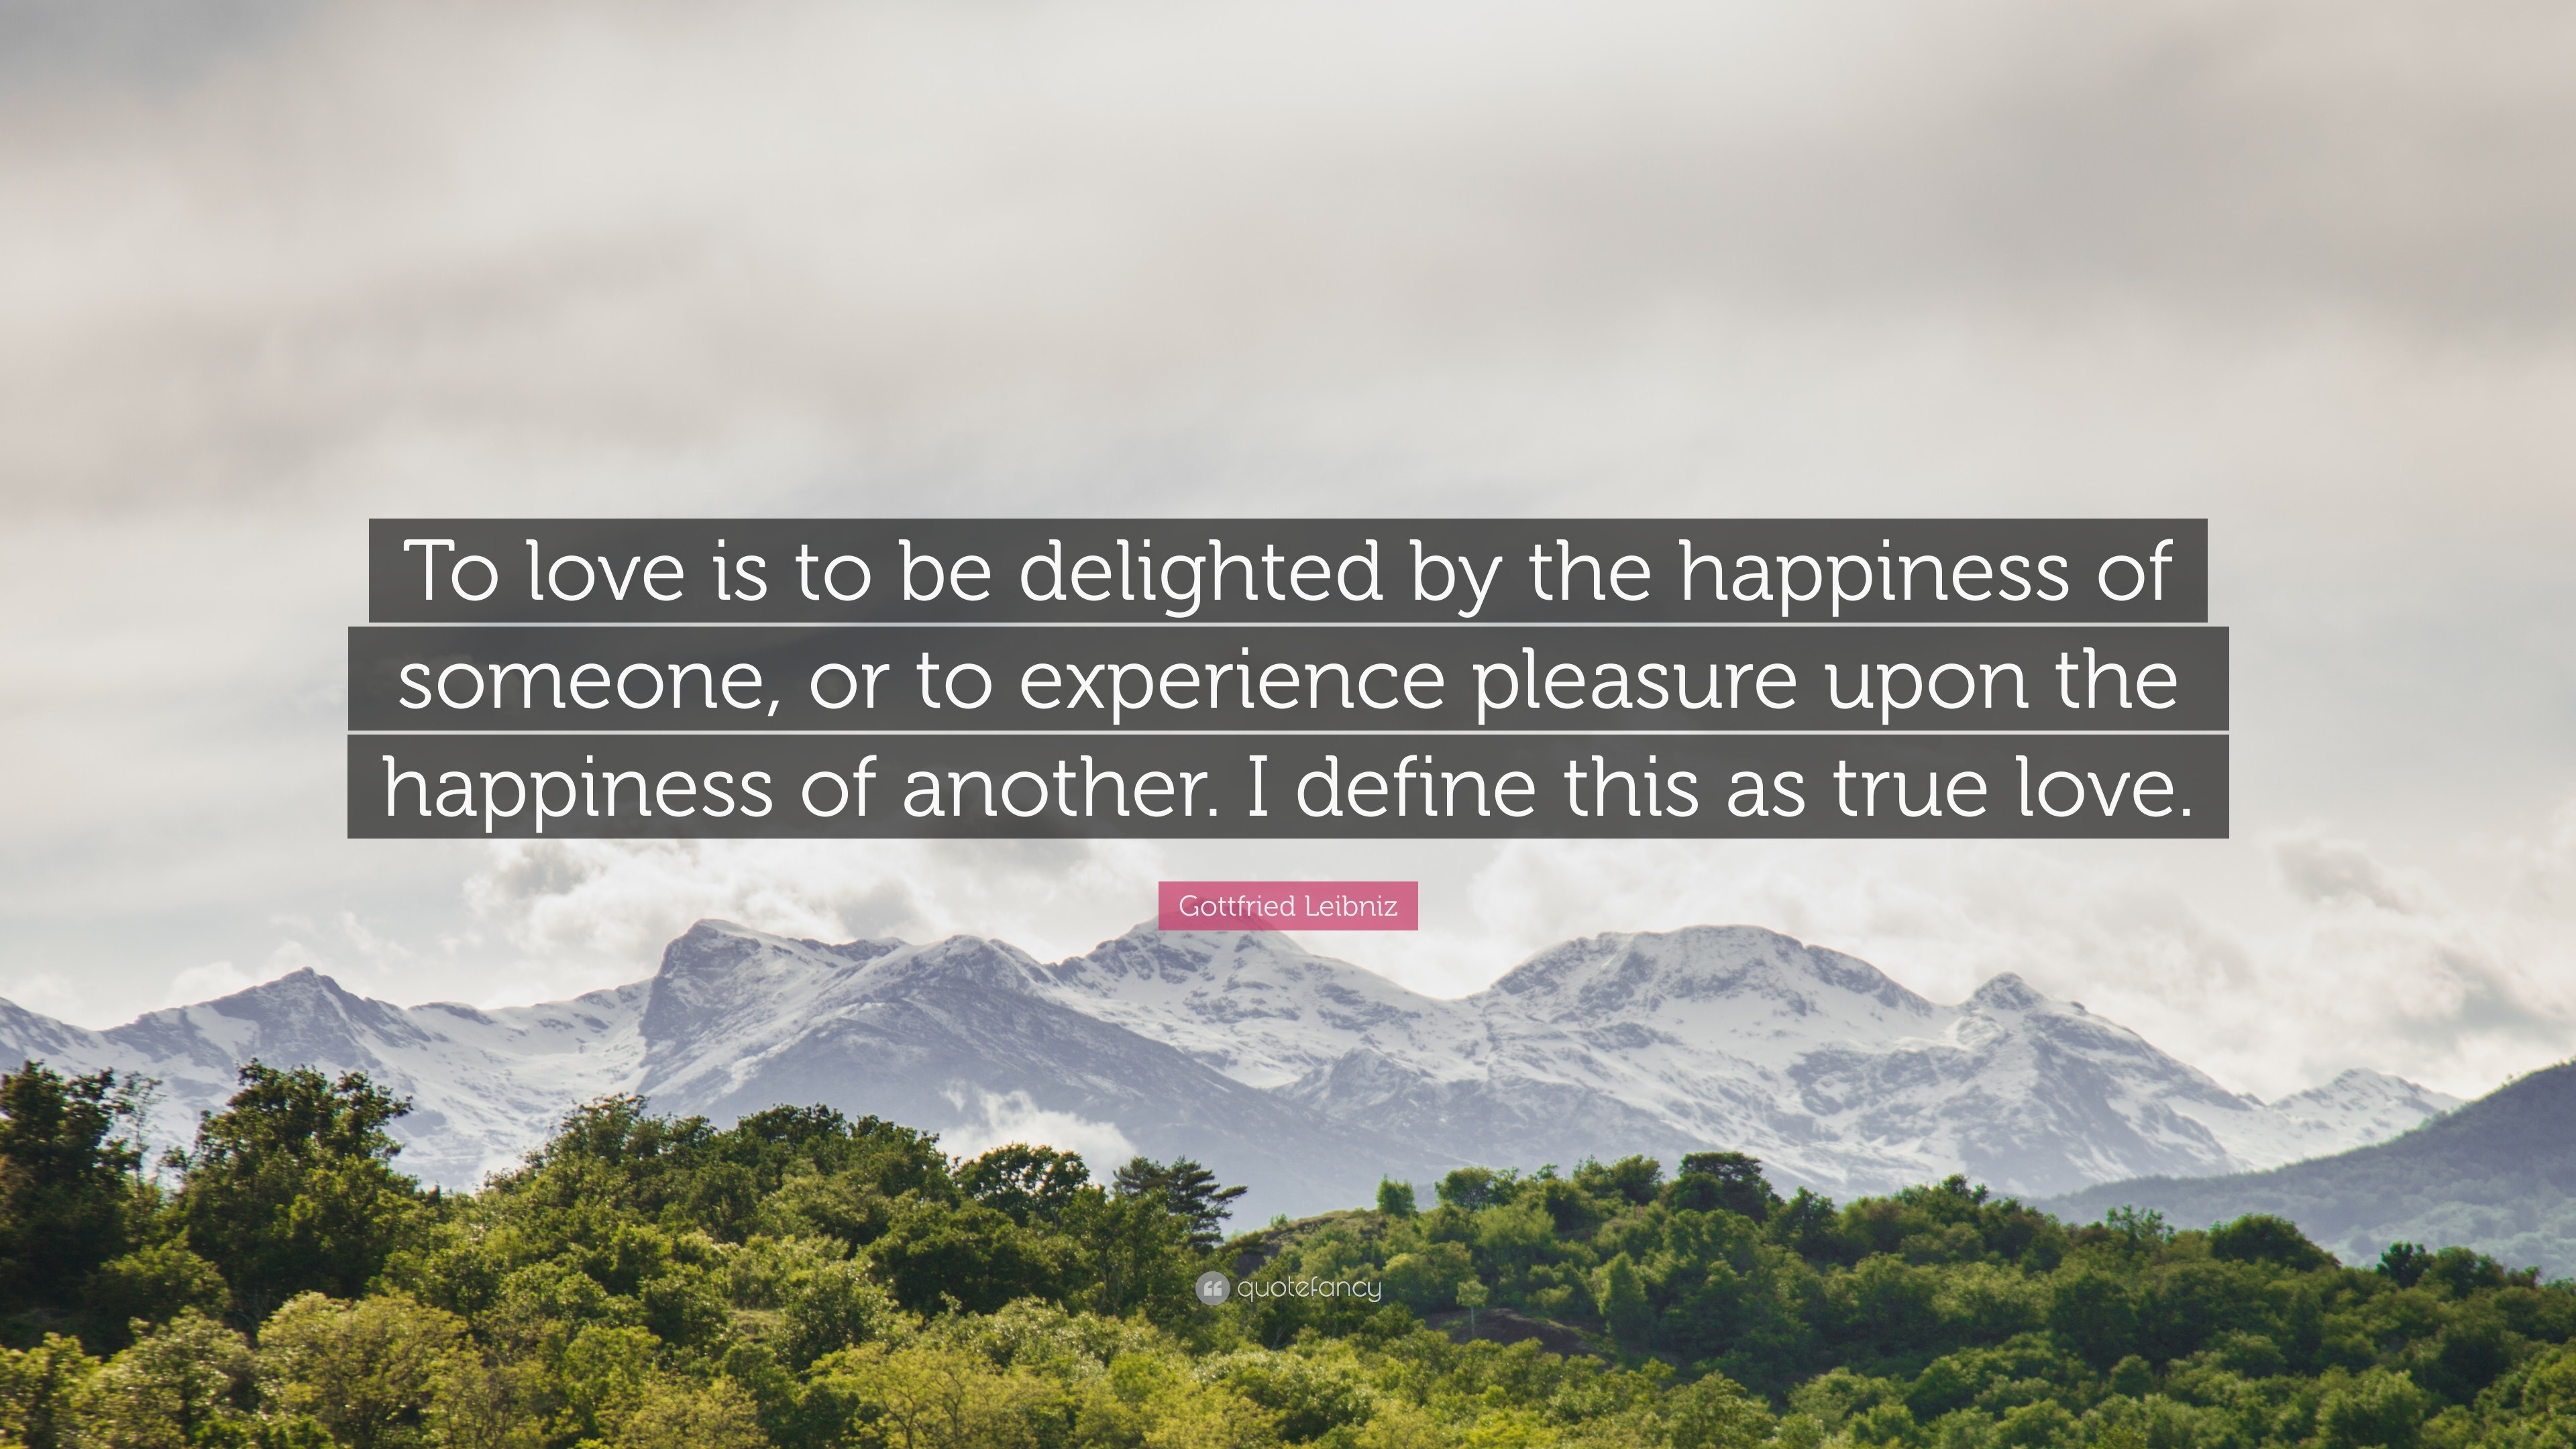 Gottfried Leibniz Quote “To love is to be delighted by the happiness of someone